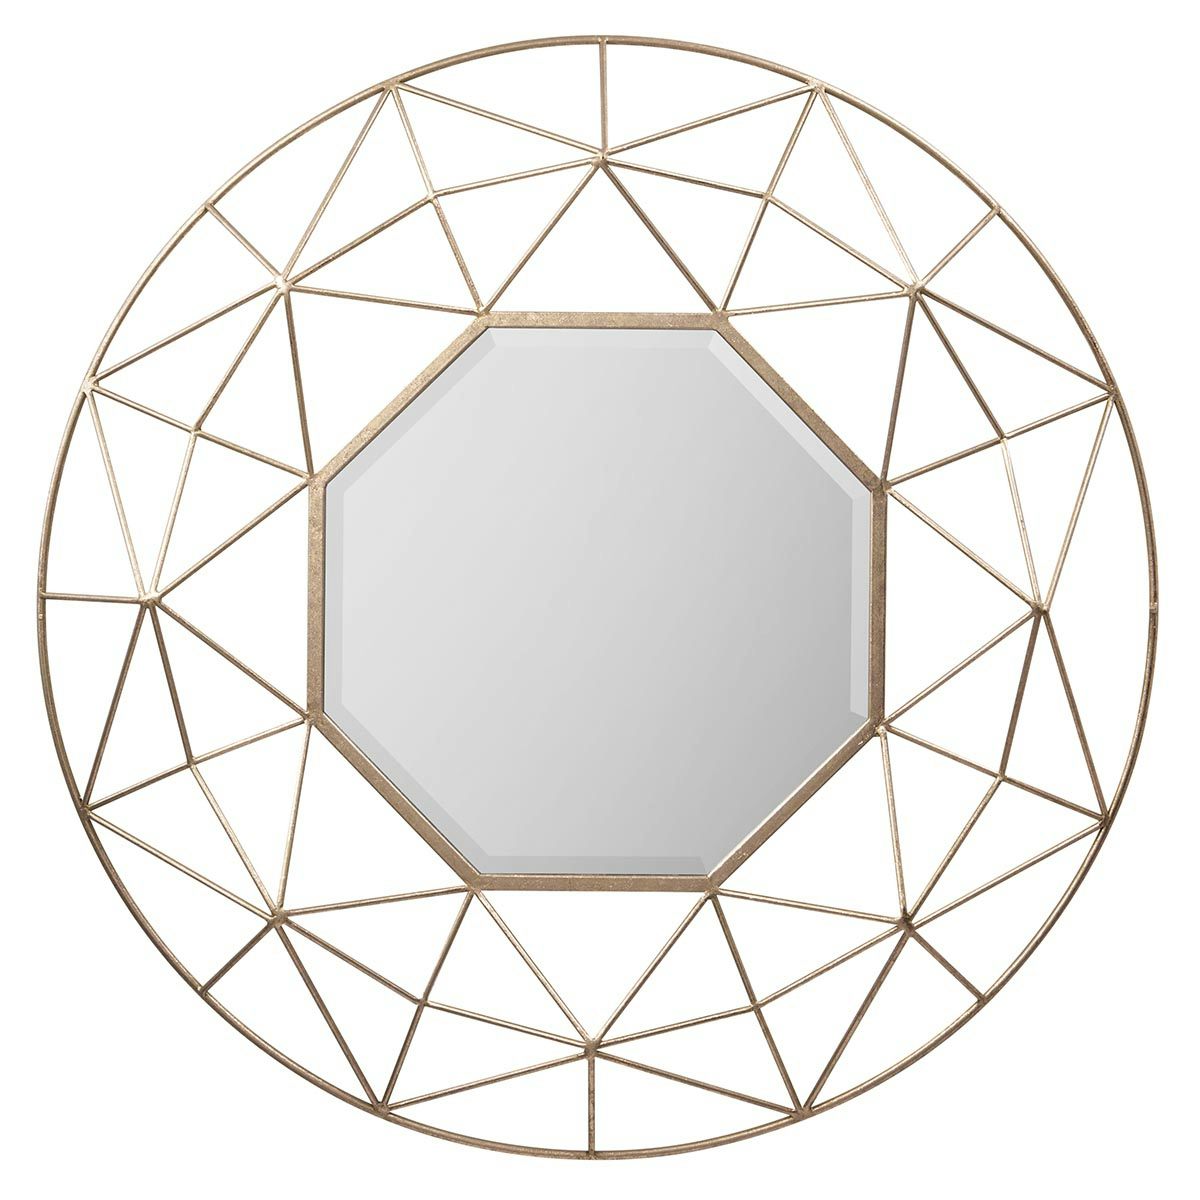 Accents Andromeda geometric gold mirror 885 x 885mm